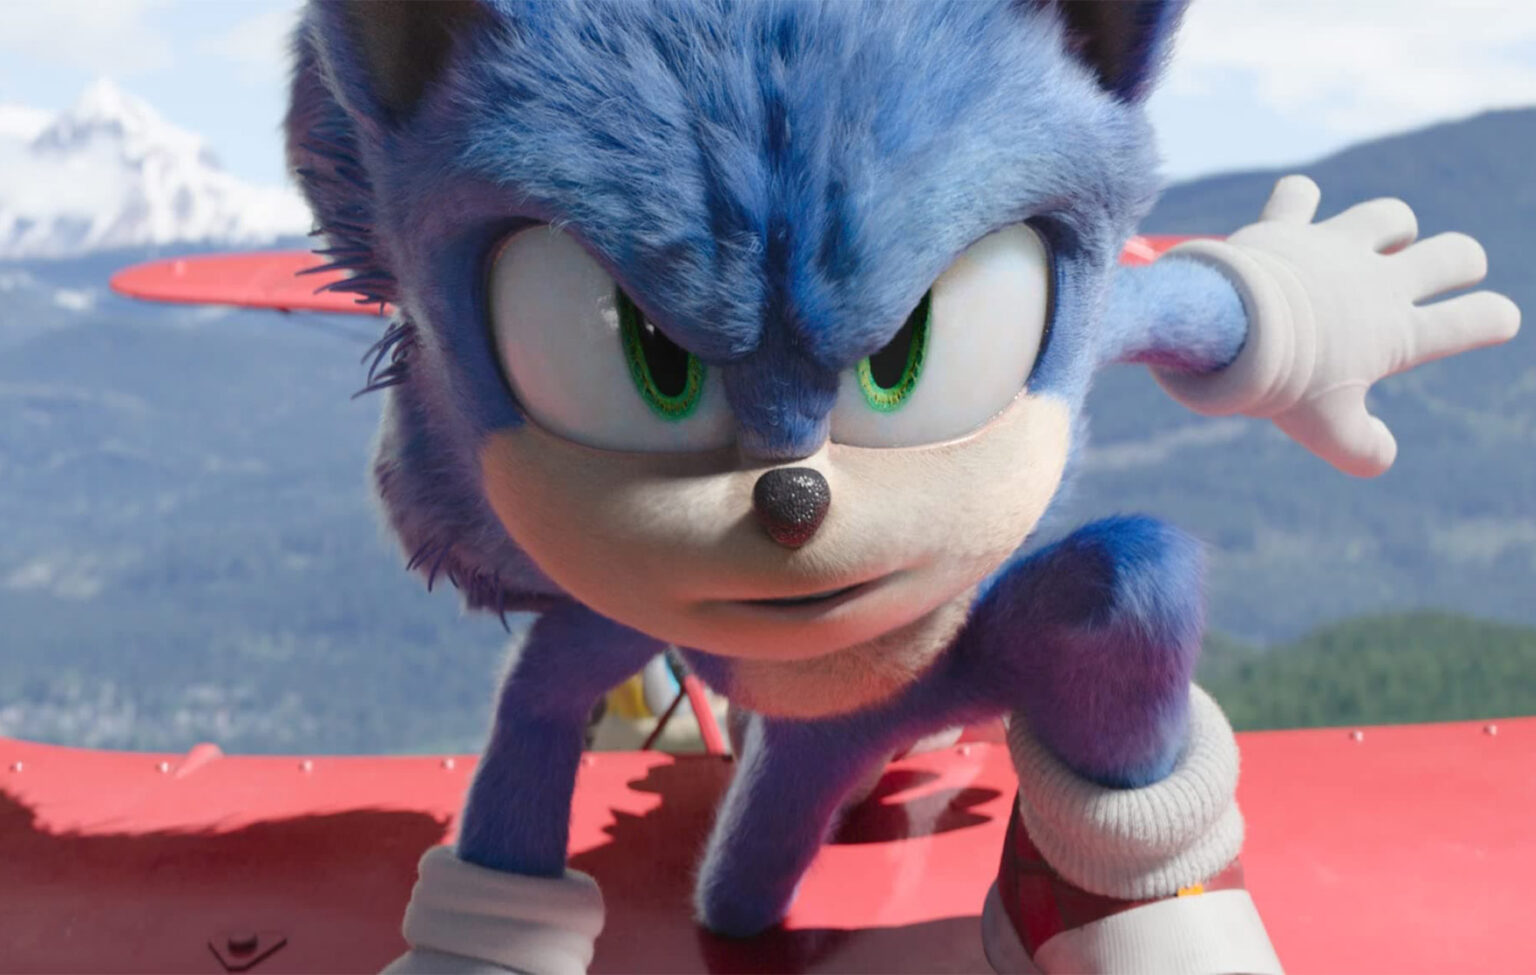 Is 'Sonic the Hedgehog 2' on Disney Plus, HBO Max, Netflix or Amazon Prime? Here's how you can stream the movie for free online now.